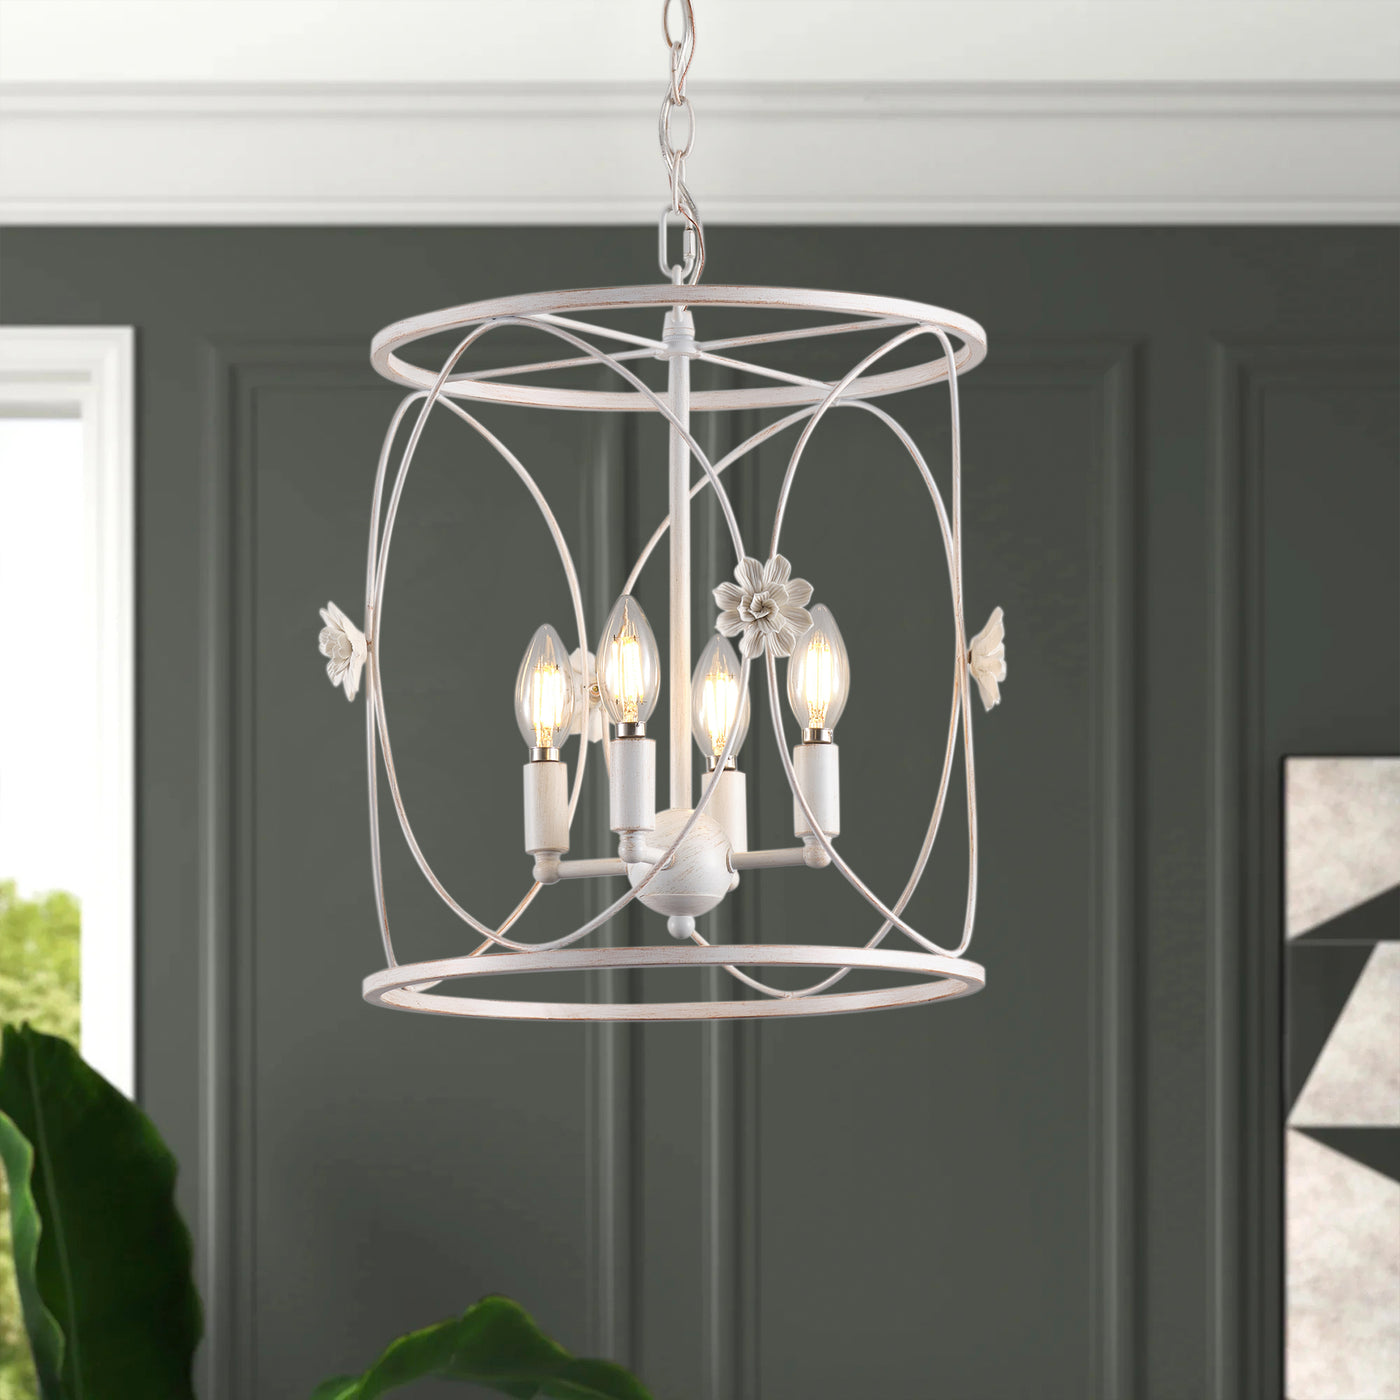 4-Lights Openwork Design Surrounded by Carving White Pendant Lighting